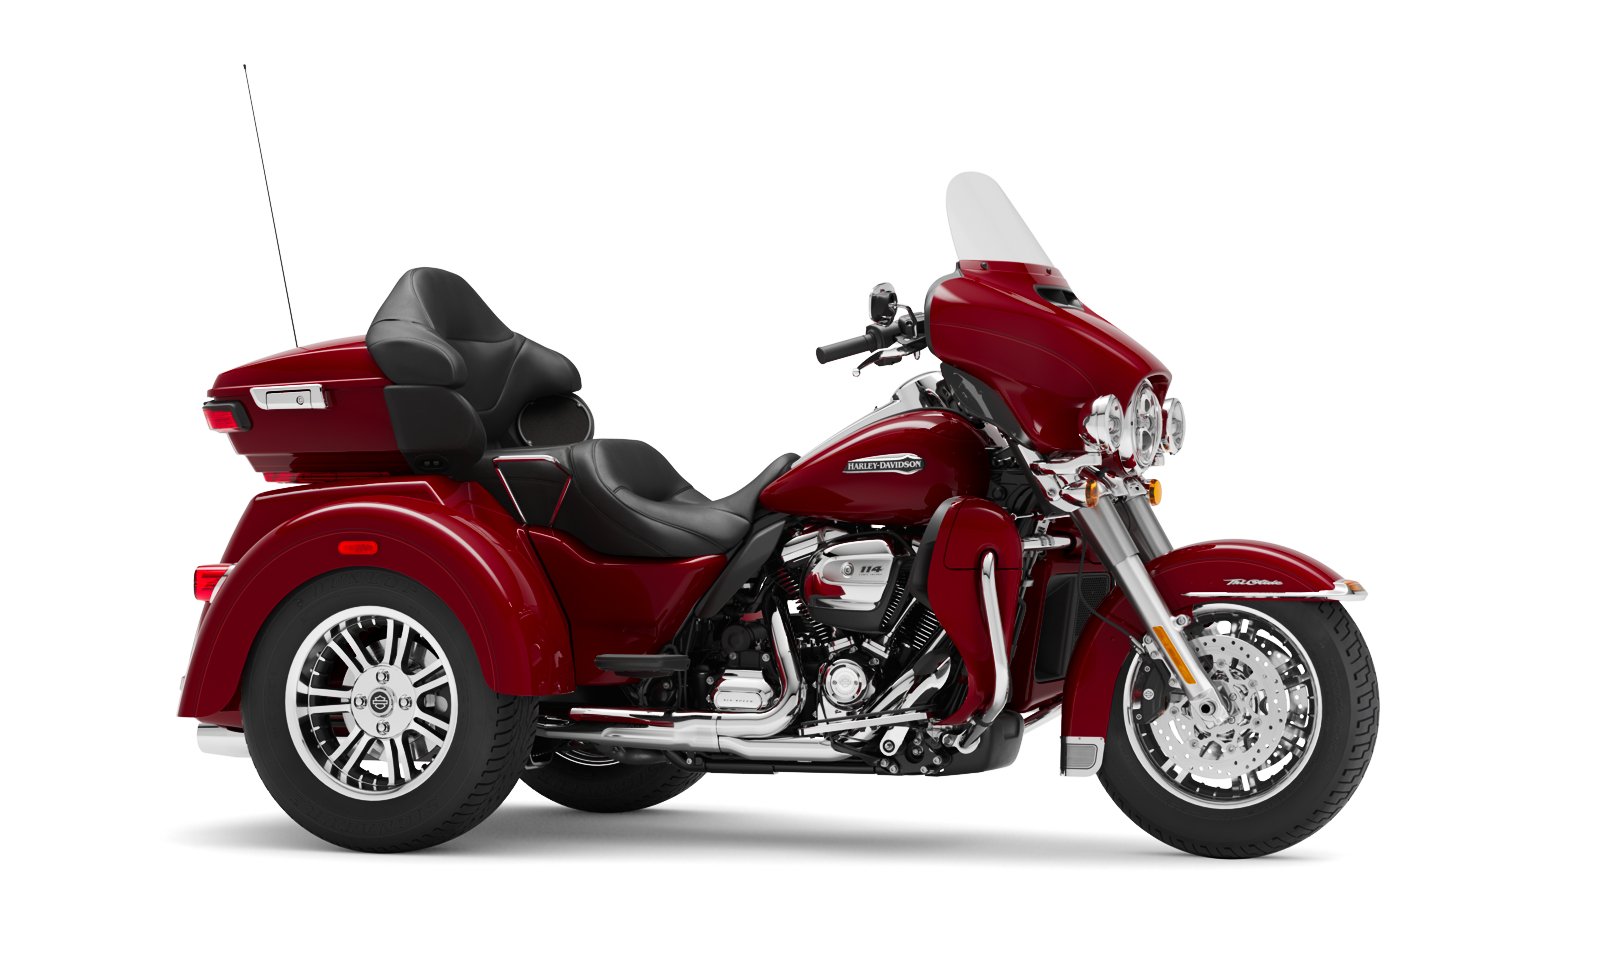 2021 Tri Glide Ultra Motorcycle Harley Davidson Asia Pacific Markets